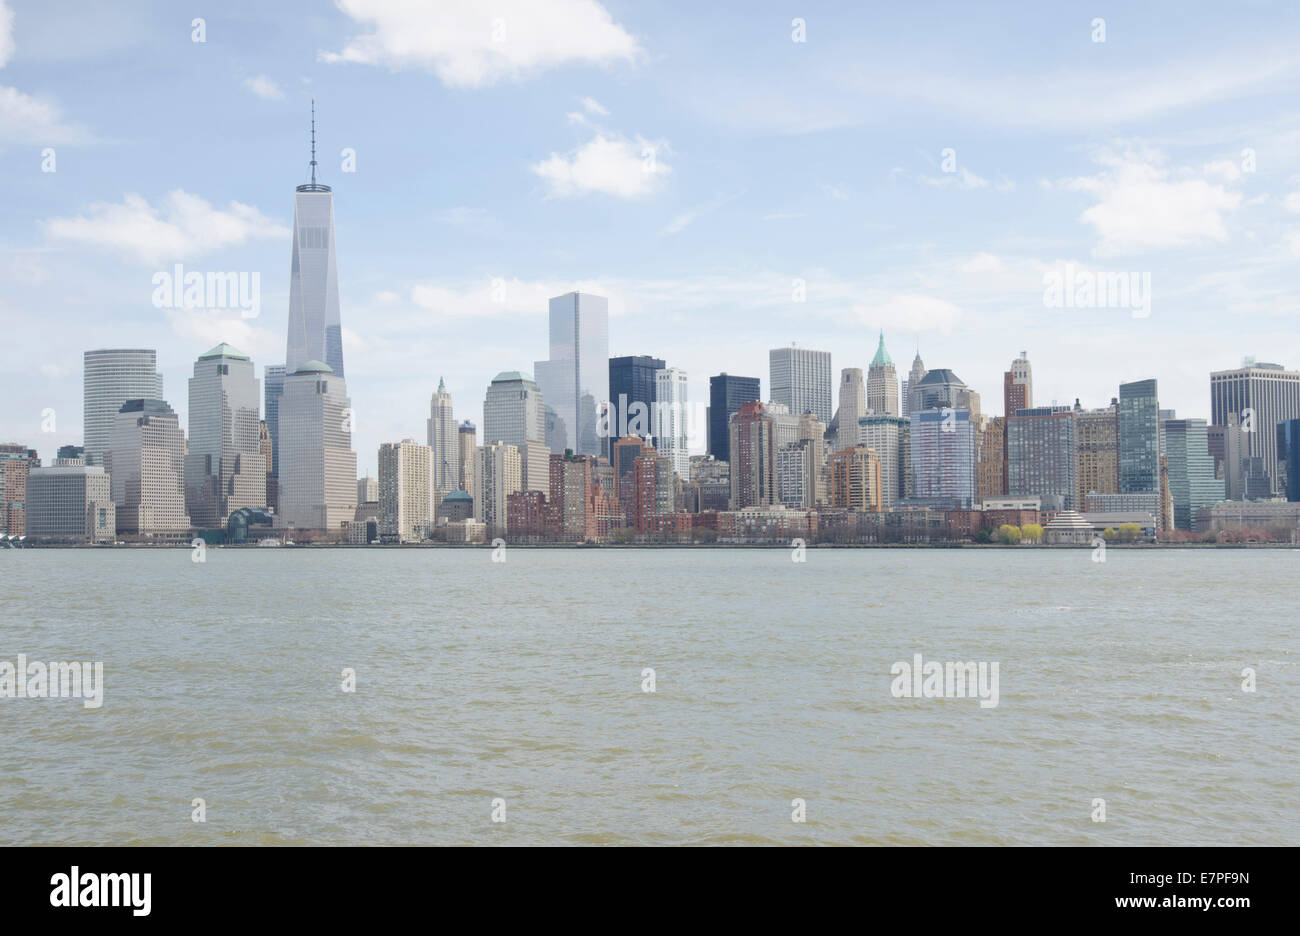 USA, New Jersey, Skyline of New York City with Freedom tower Stock Photo